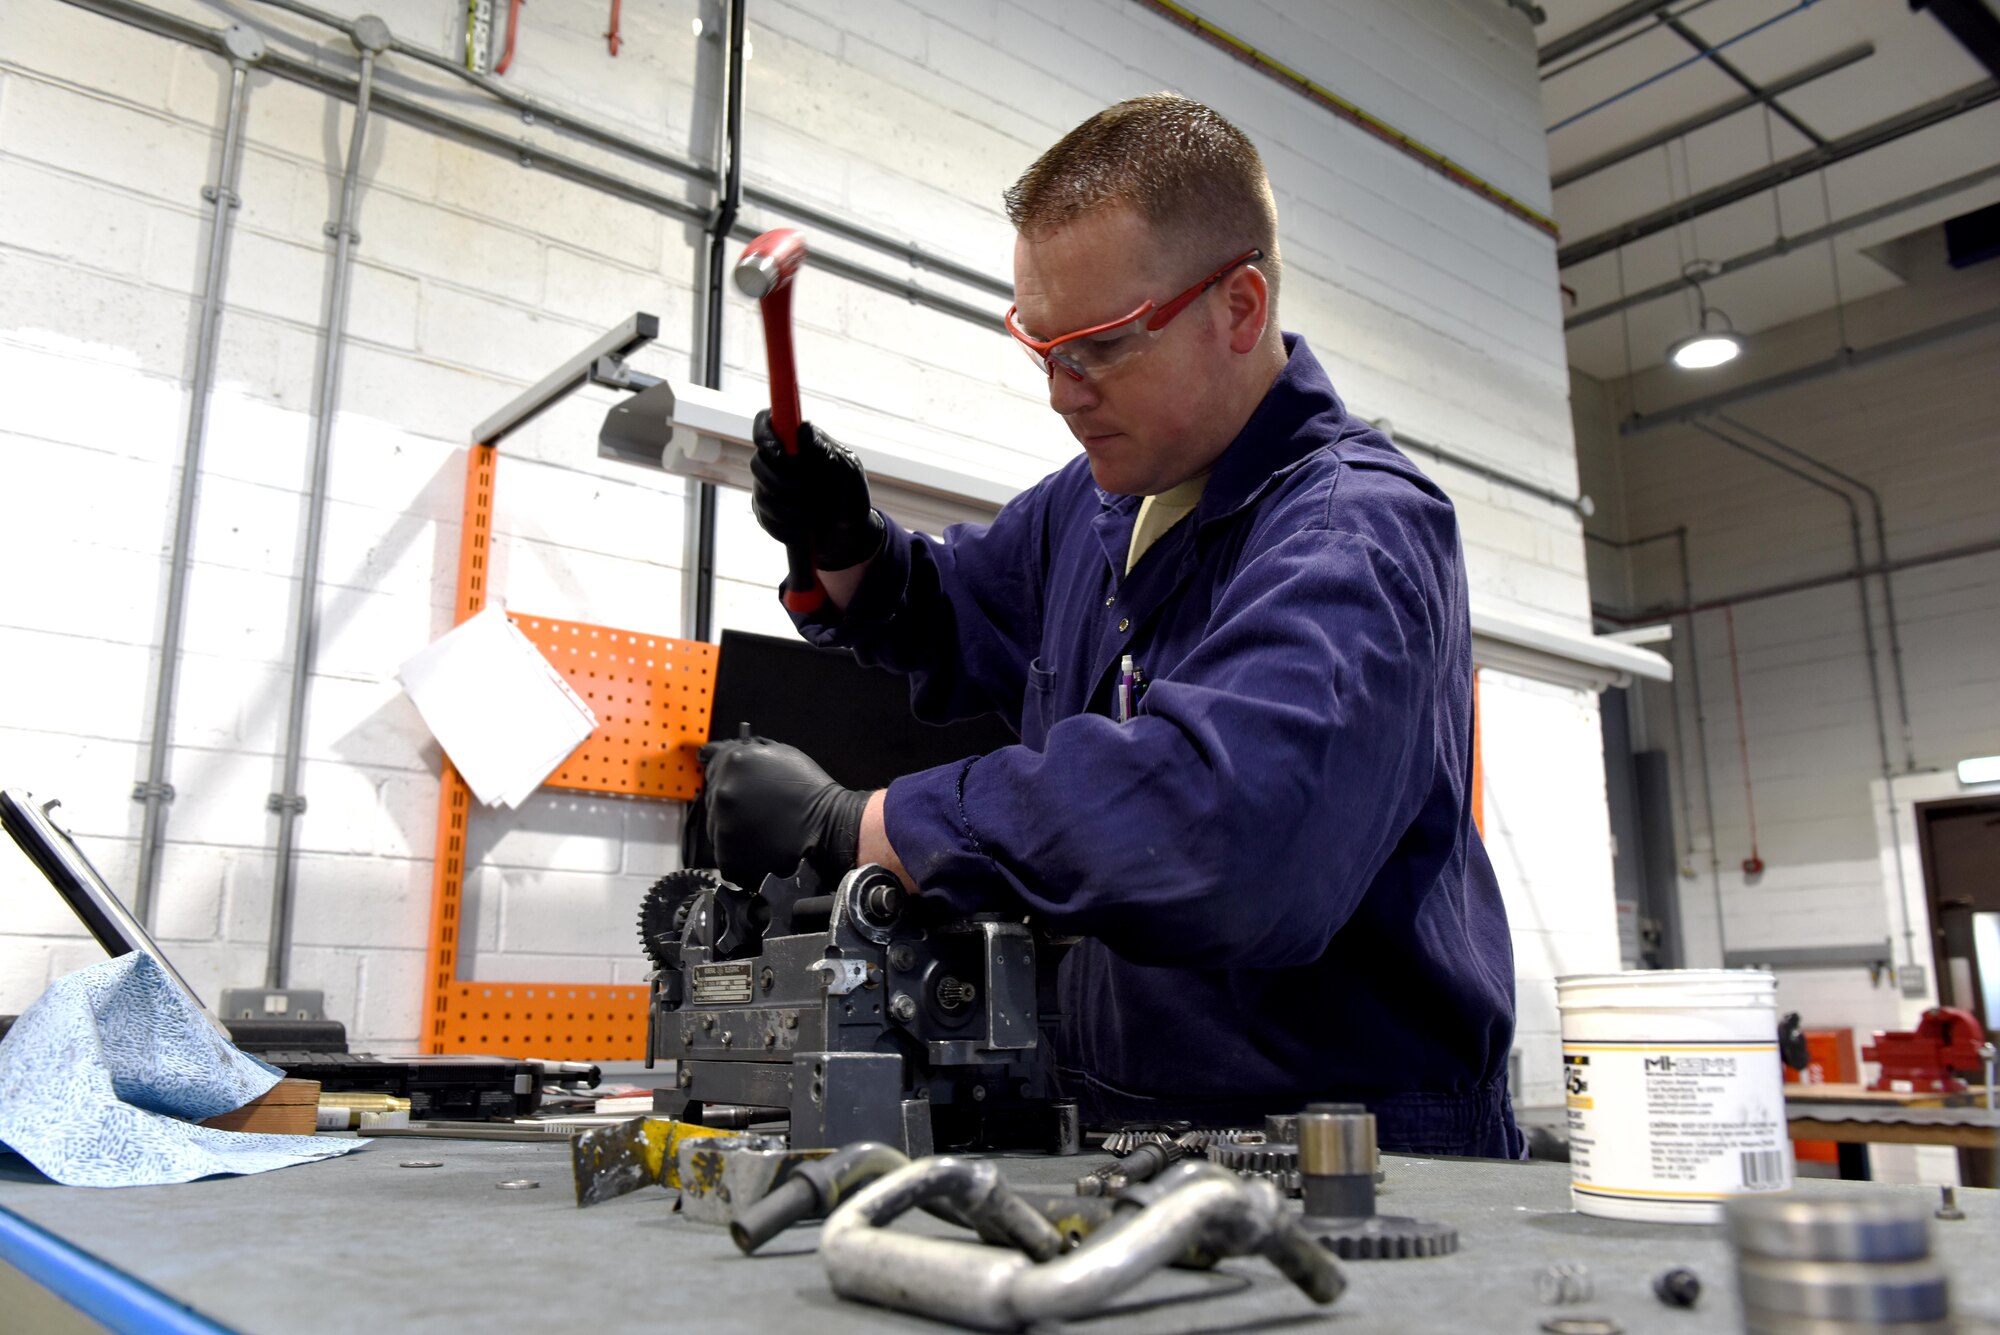 An aircraft armament specialist from the 48th Munitions Squadron preforms a rebuild of a weapons interface system at Royal Air Force Lakenheath, England, June 13. Aircraft armament specialists service aircraft gun systems. (U.S. Air Force photo/Airman 1st Class John A. Crawford)